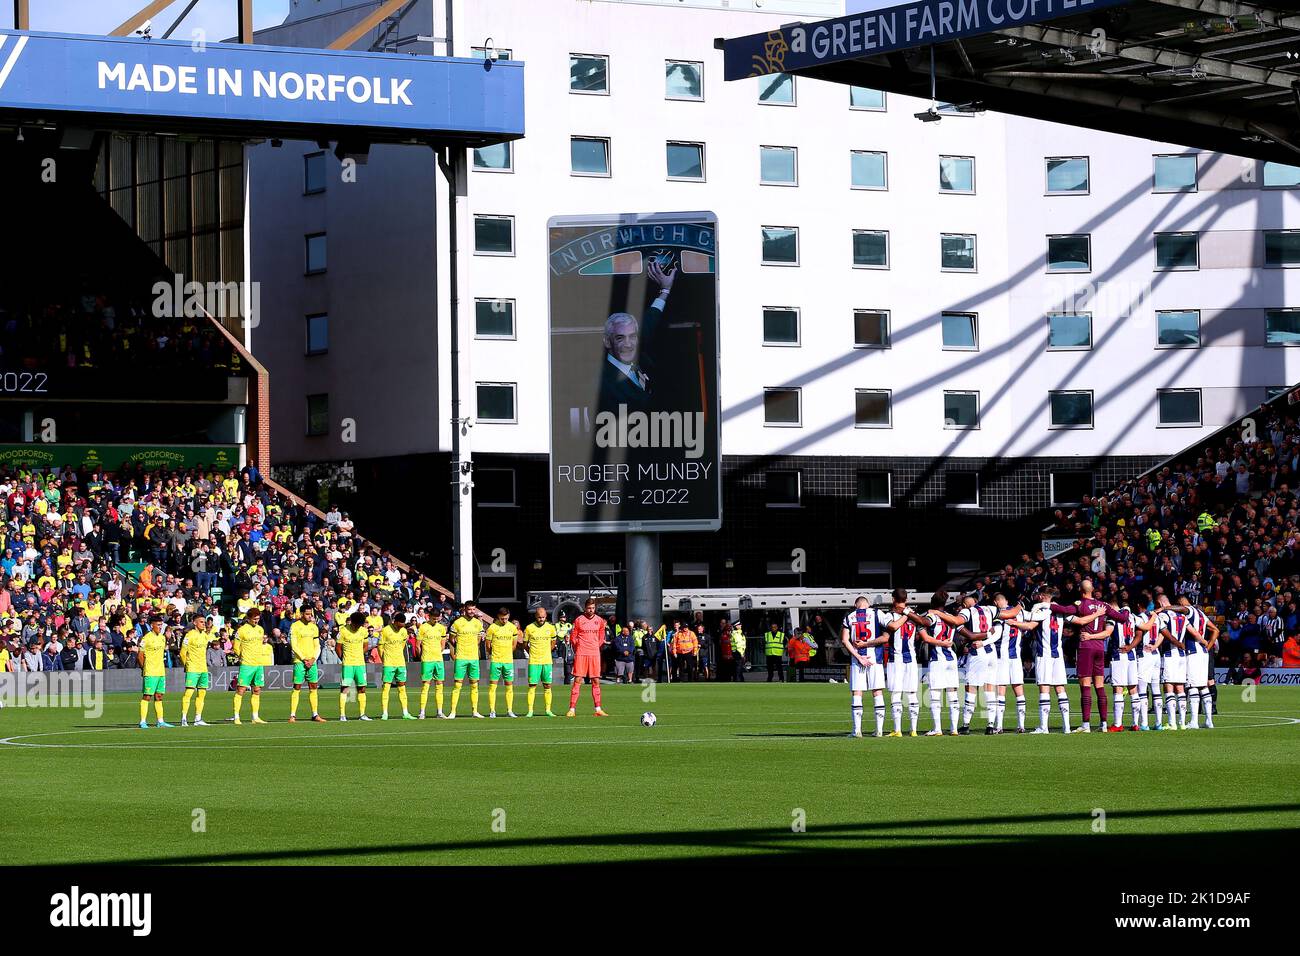 Players observe a minute's silence in memory of former Norwich City chairman Roger Munby ahead of the Sky Bet Championship match at Carrow Road, Norwich. Picture date: Saturday September 17, 2022. Stock Photo